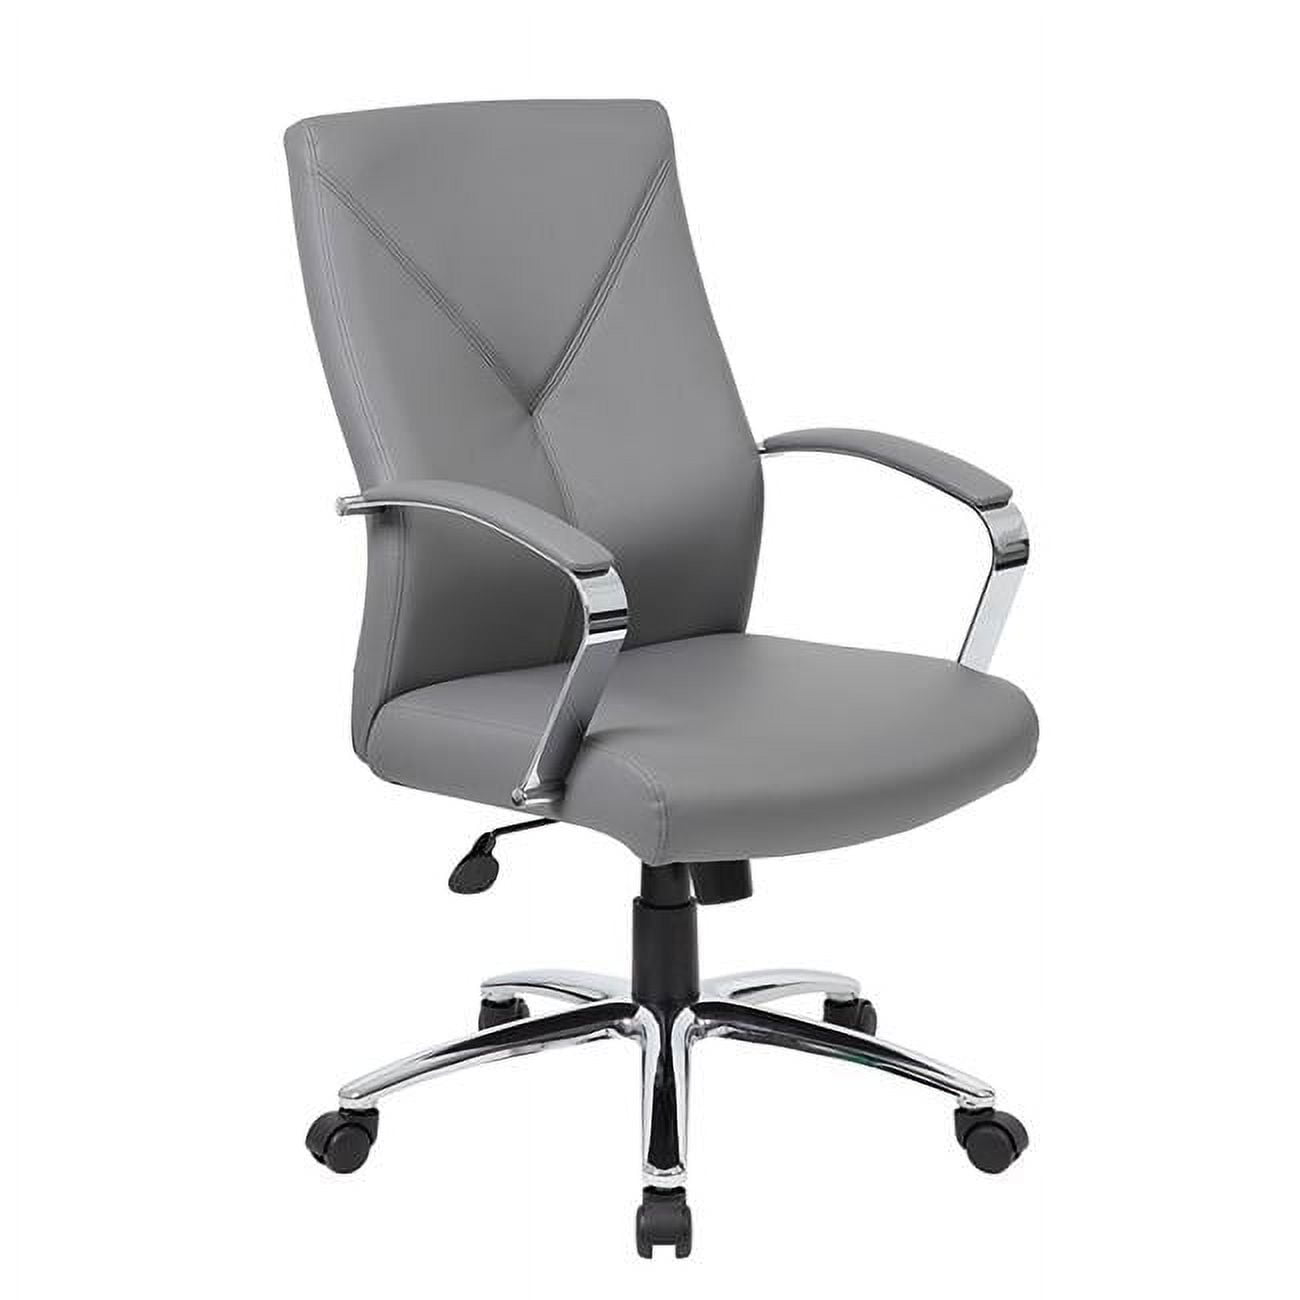 B10101-gy Executive Chair With Silver White Arm & Base